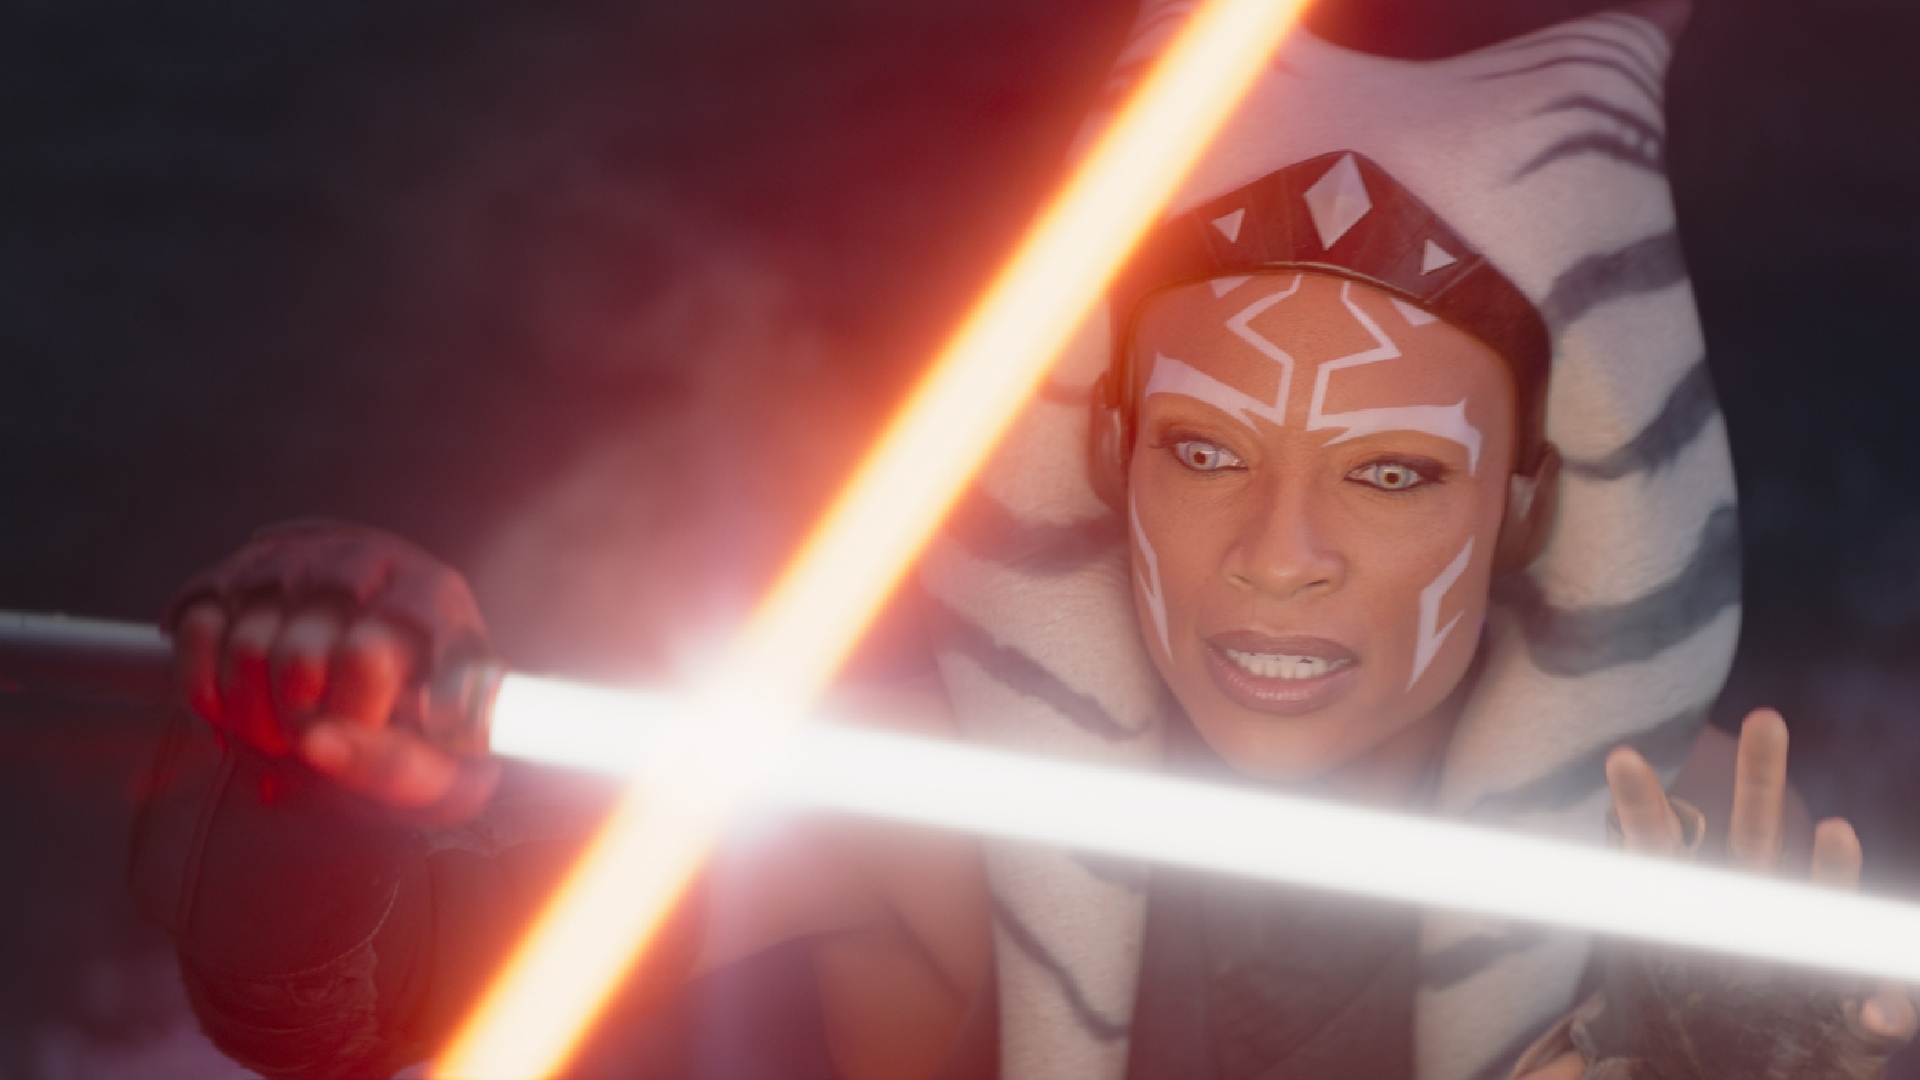 An easily missed Ahsoka moment shows an chilling brush with the dark side